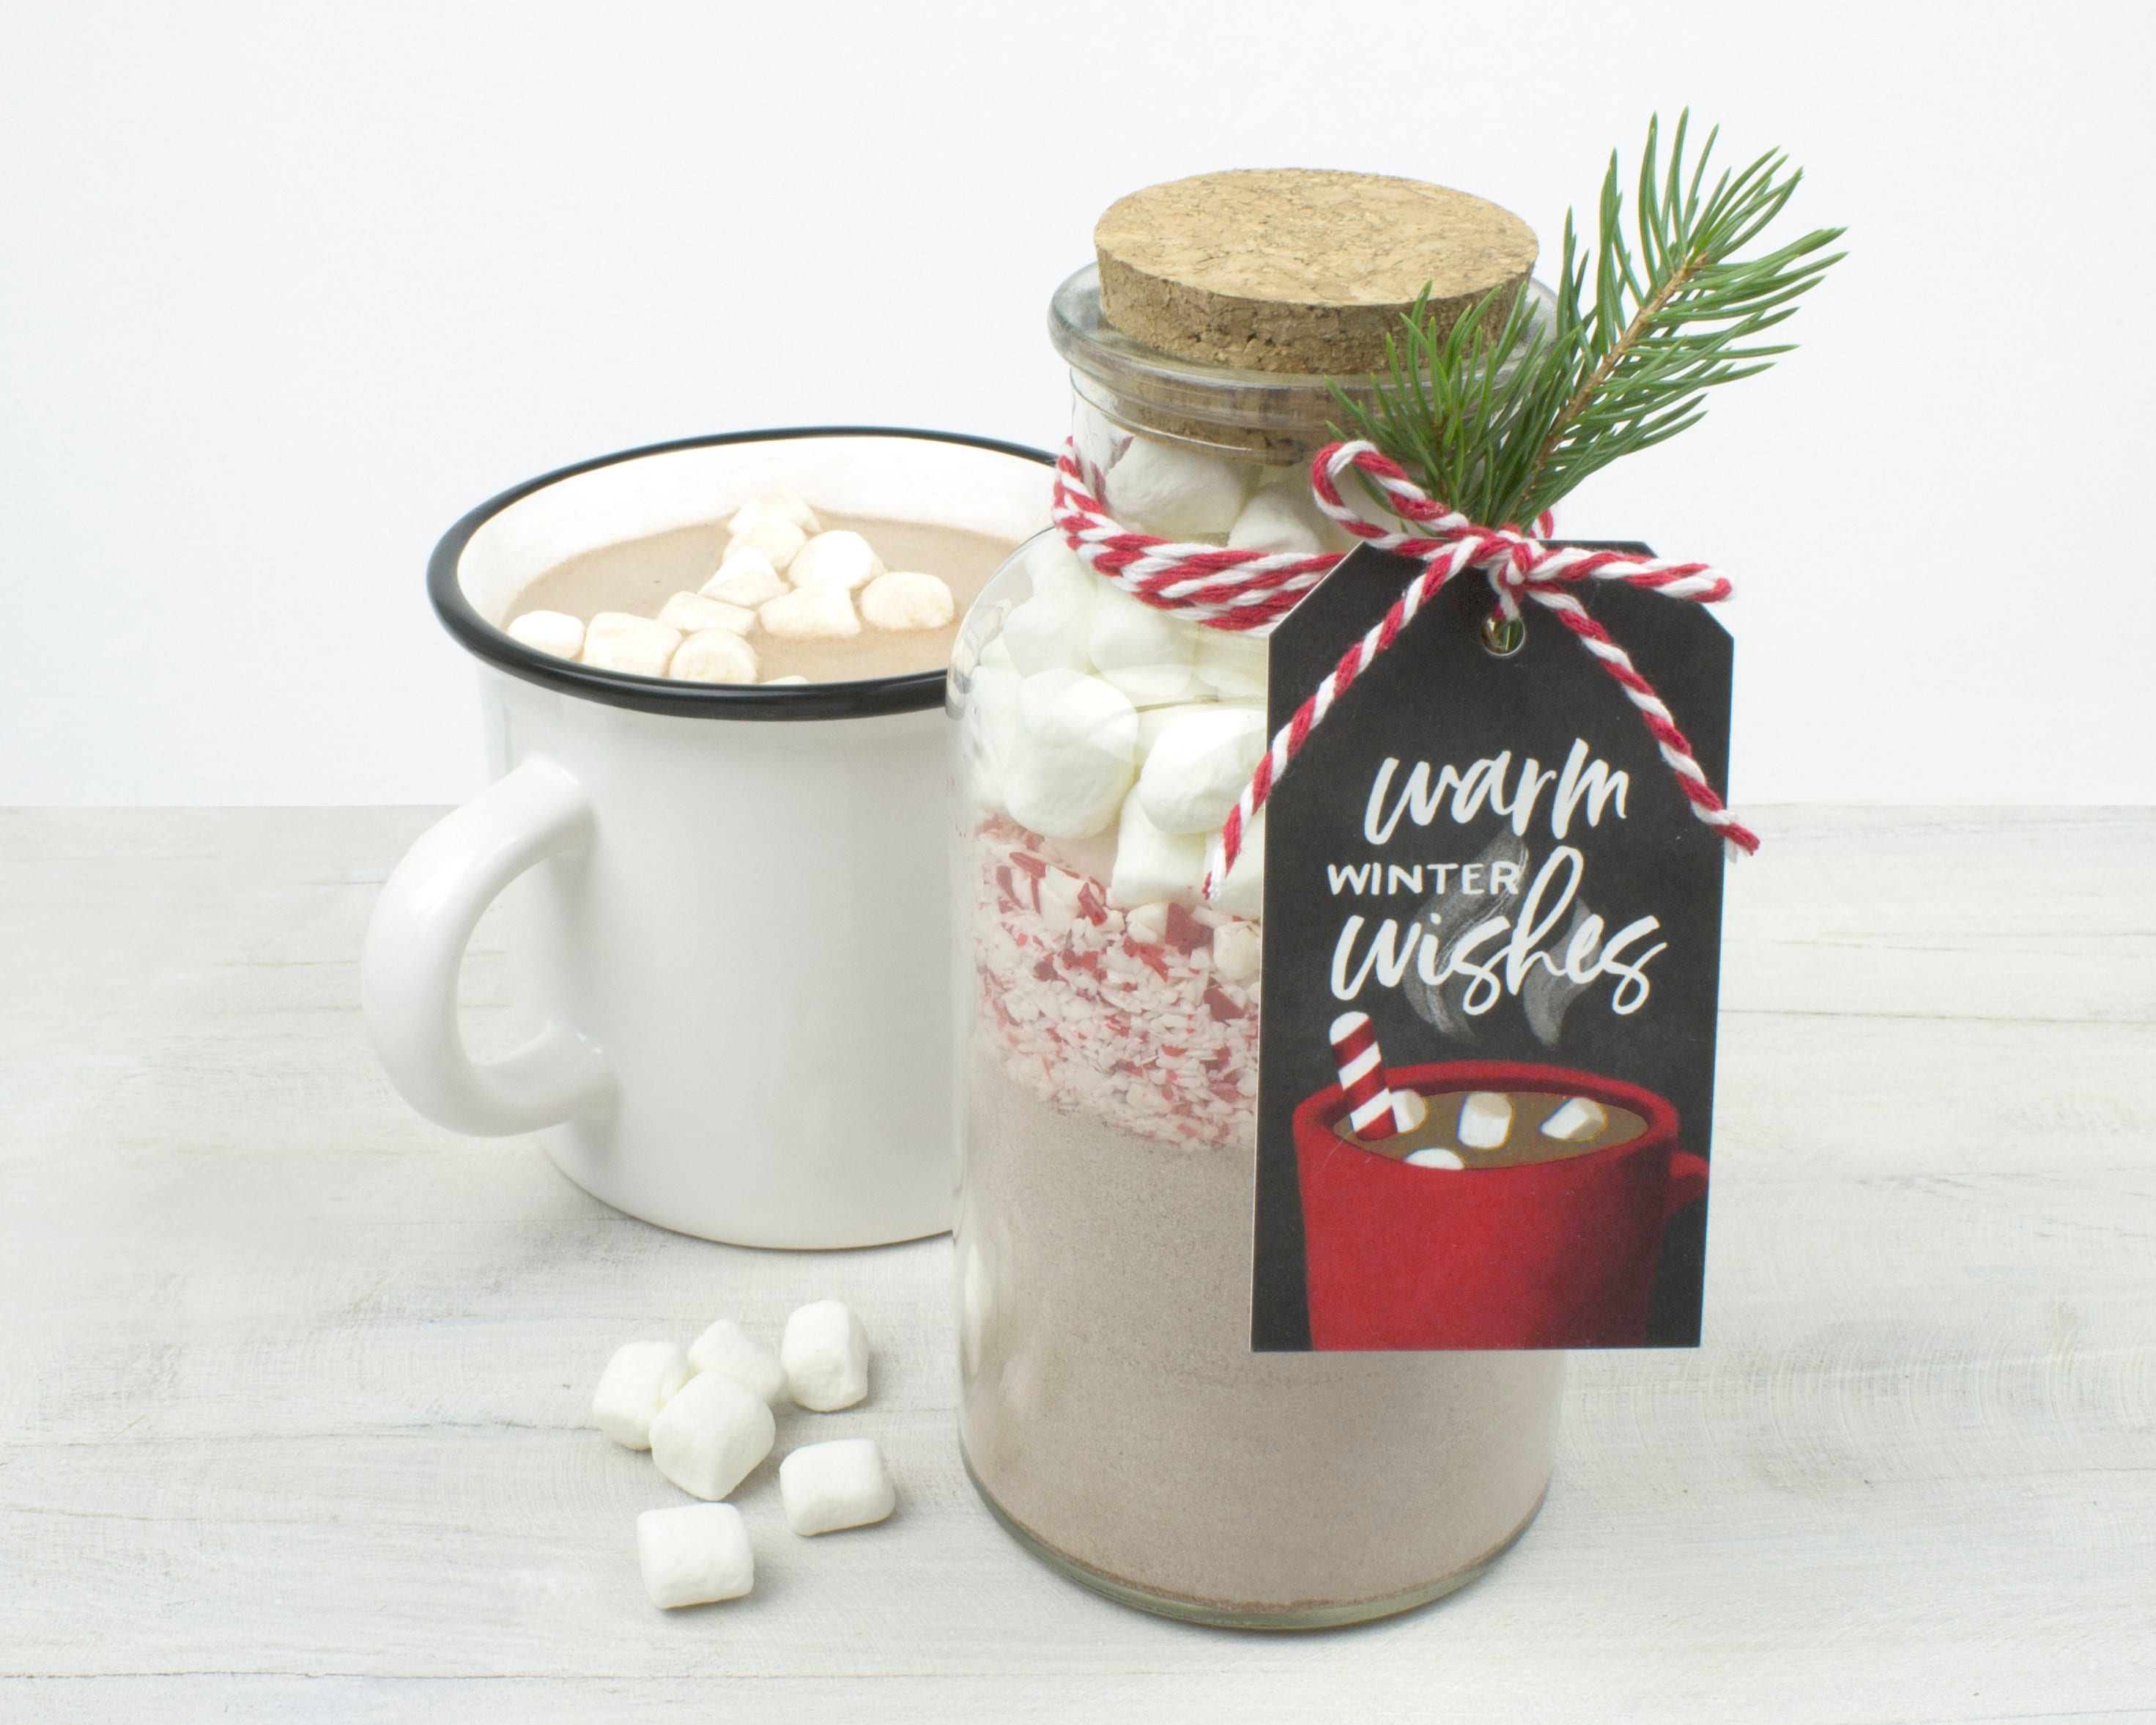 Kards by Kadie: Hot Cocoa Holder